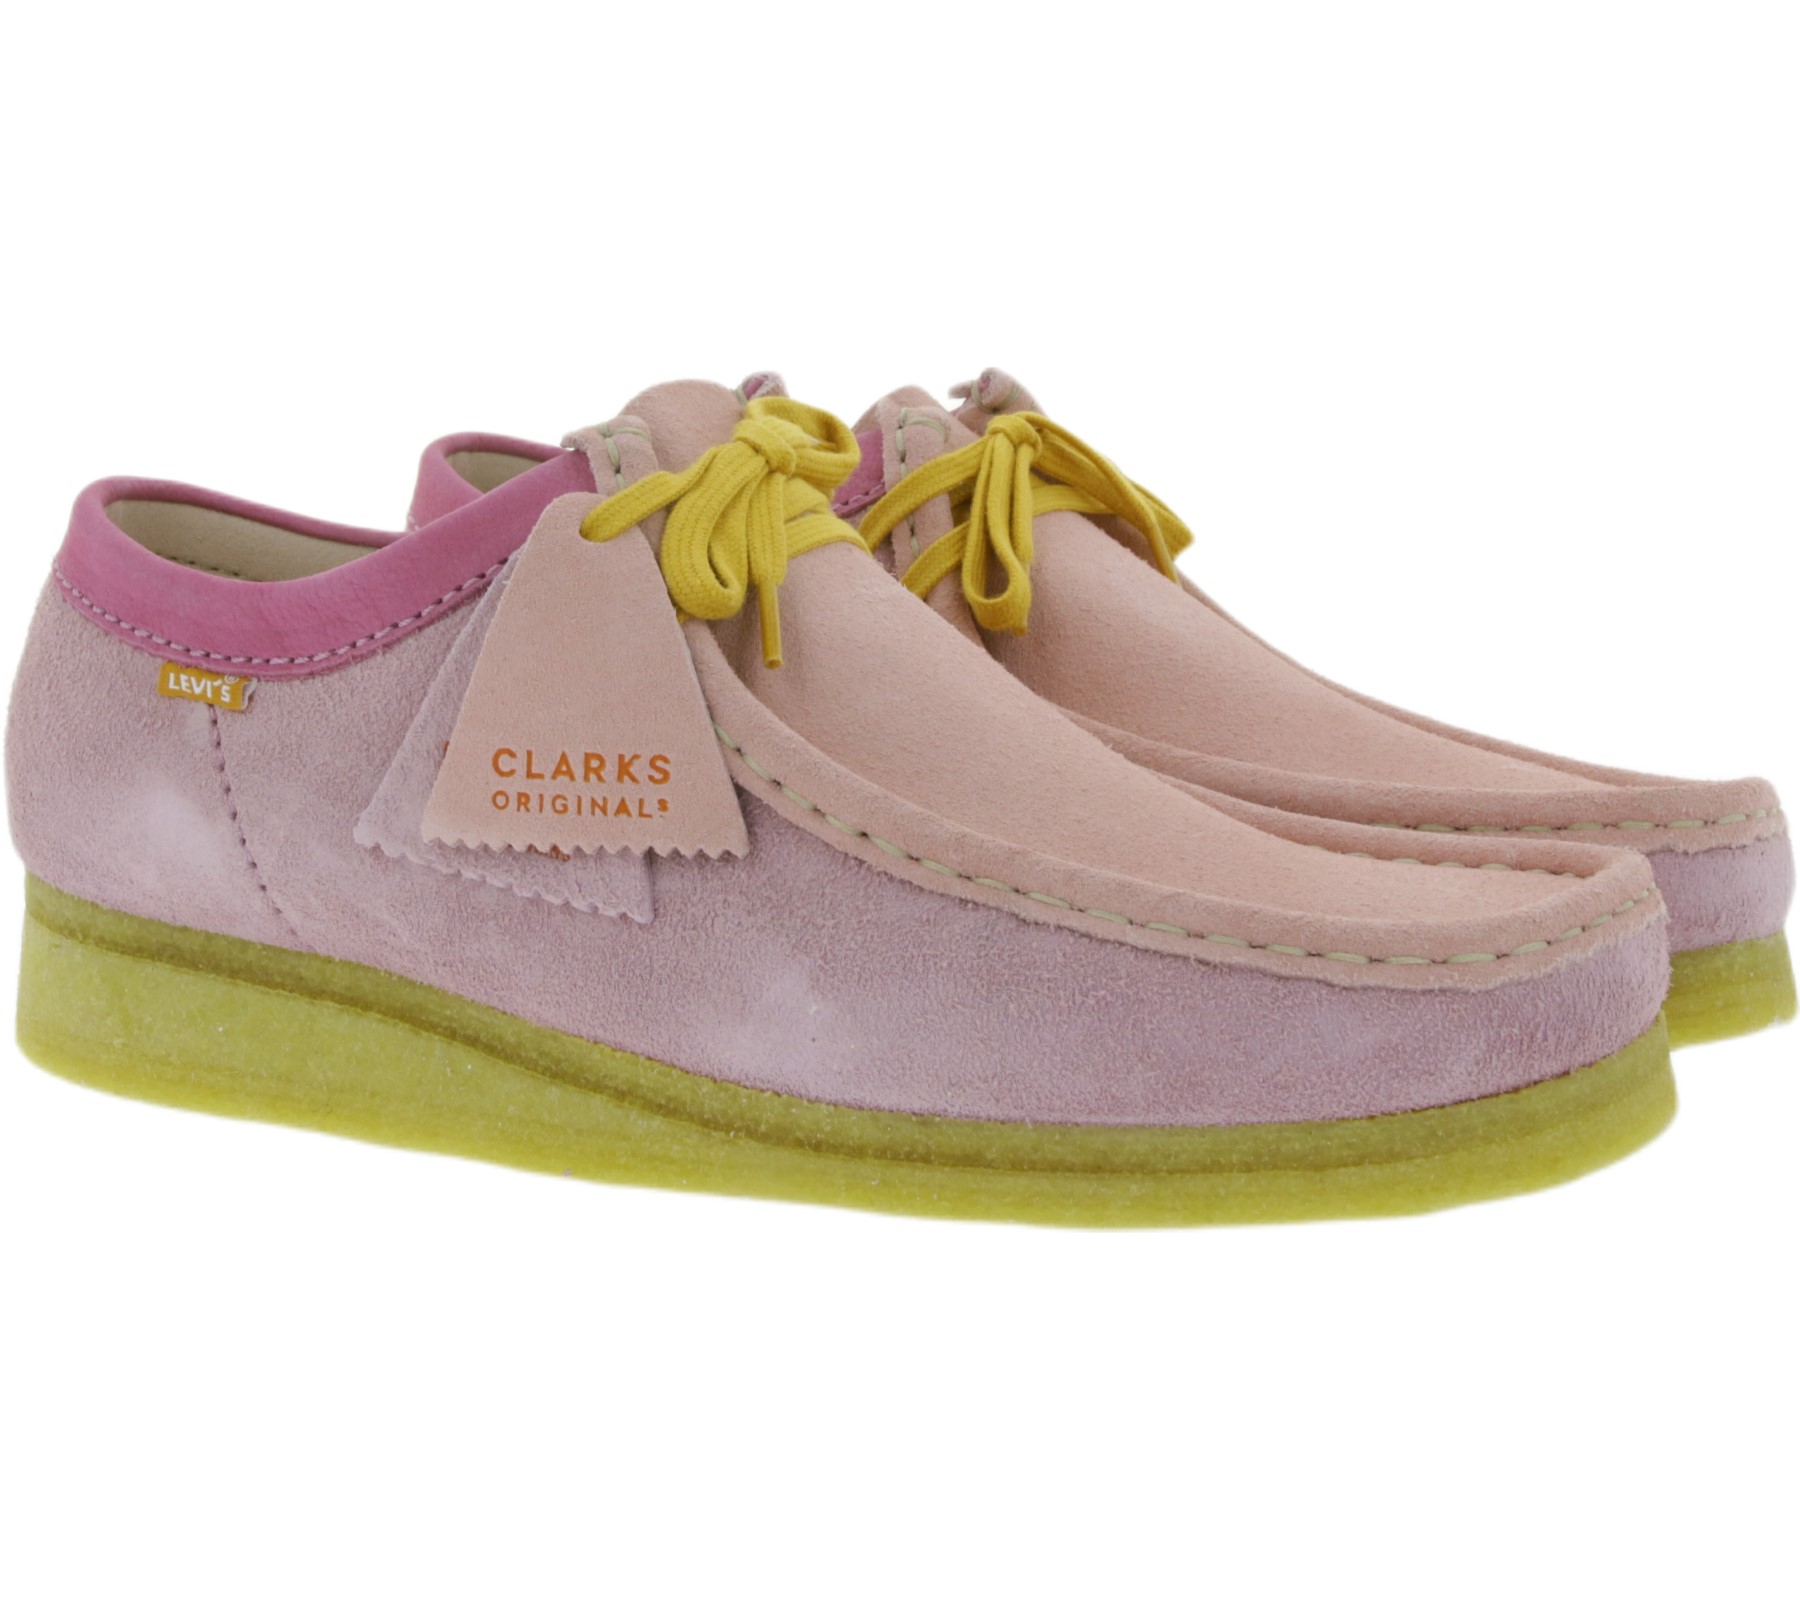 Clarks Originals x LEVI'S Wallabee Lace-up Shoes Men's Real Leather Shoes  26160322 Pink